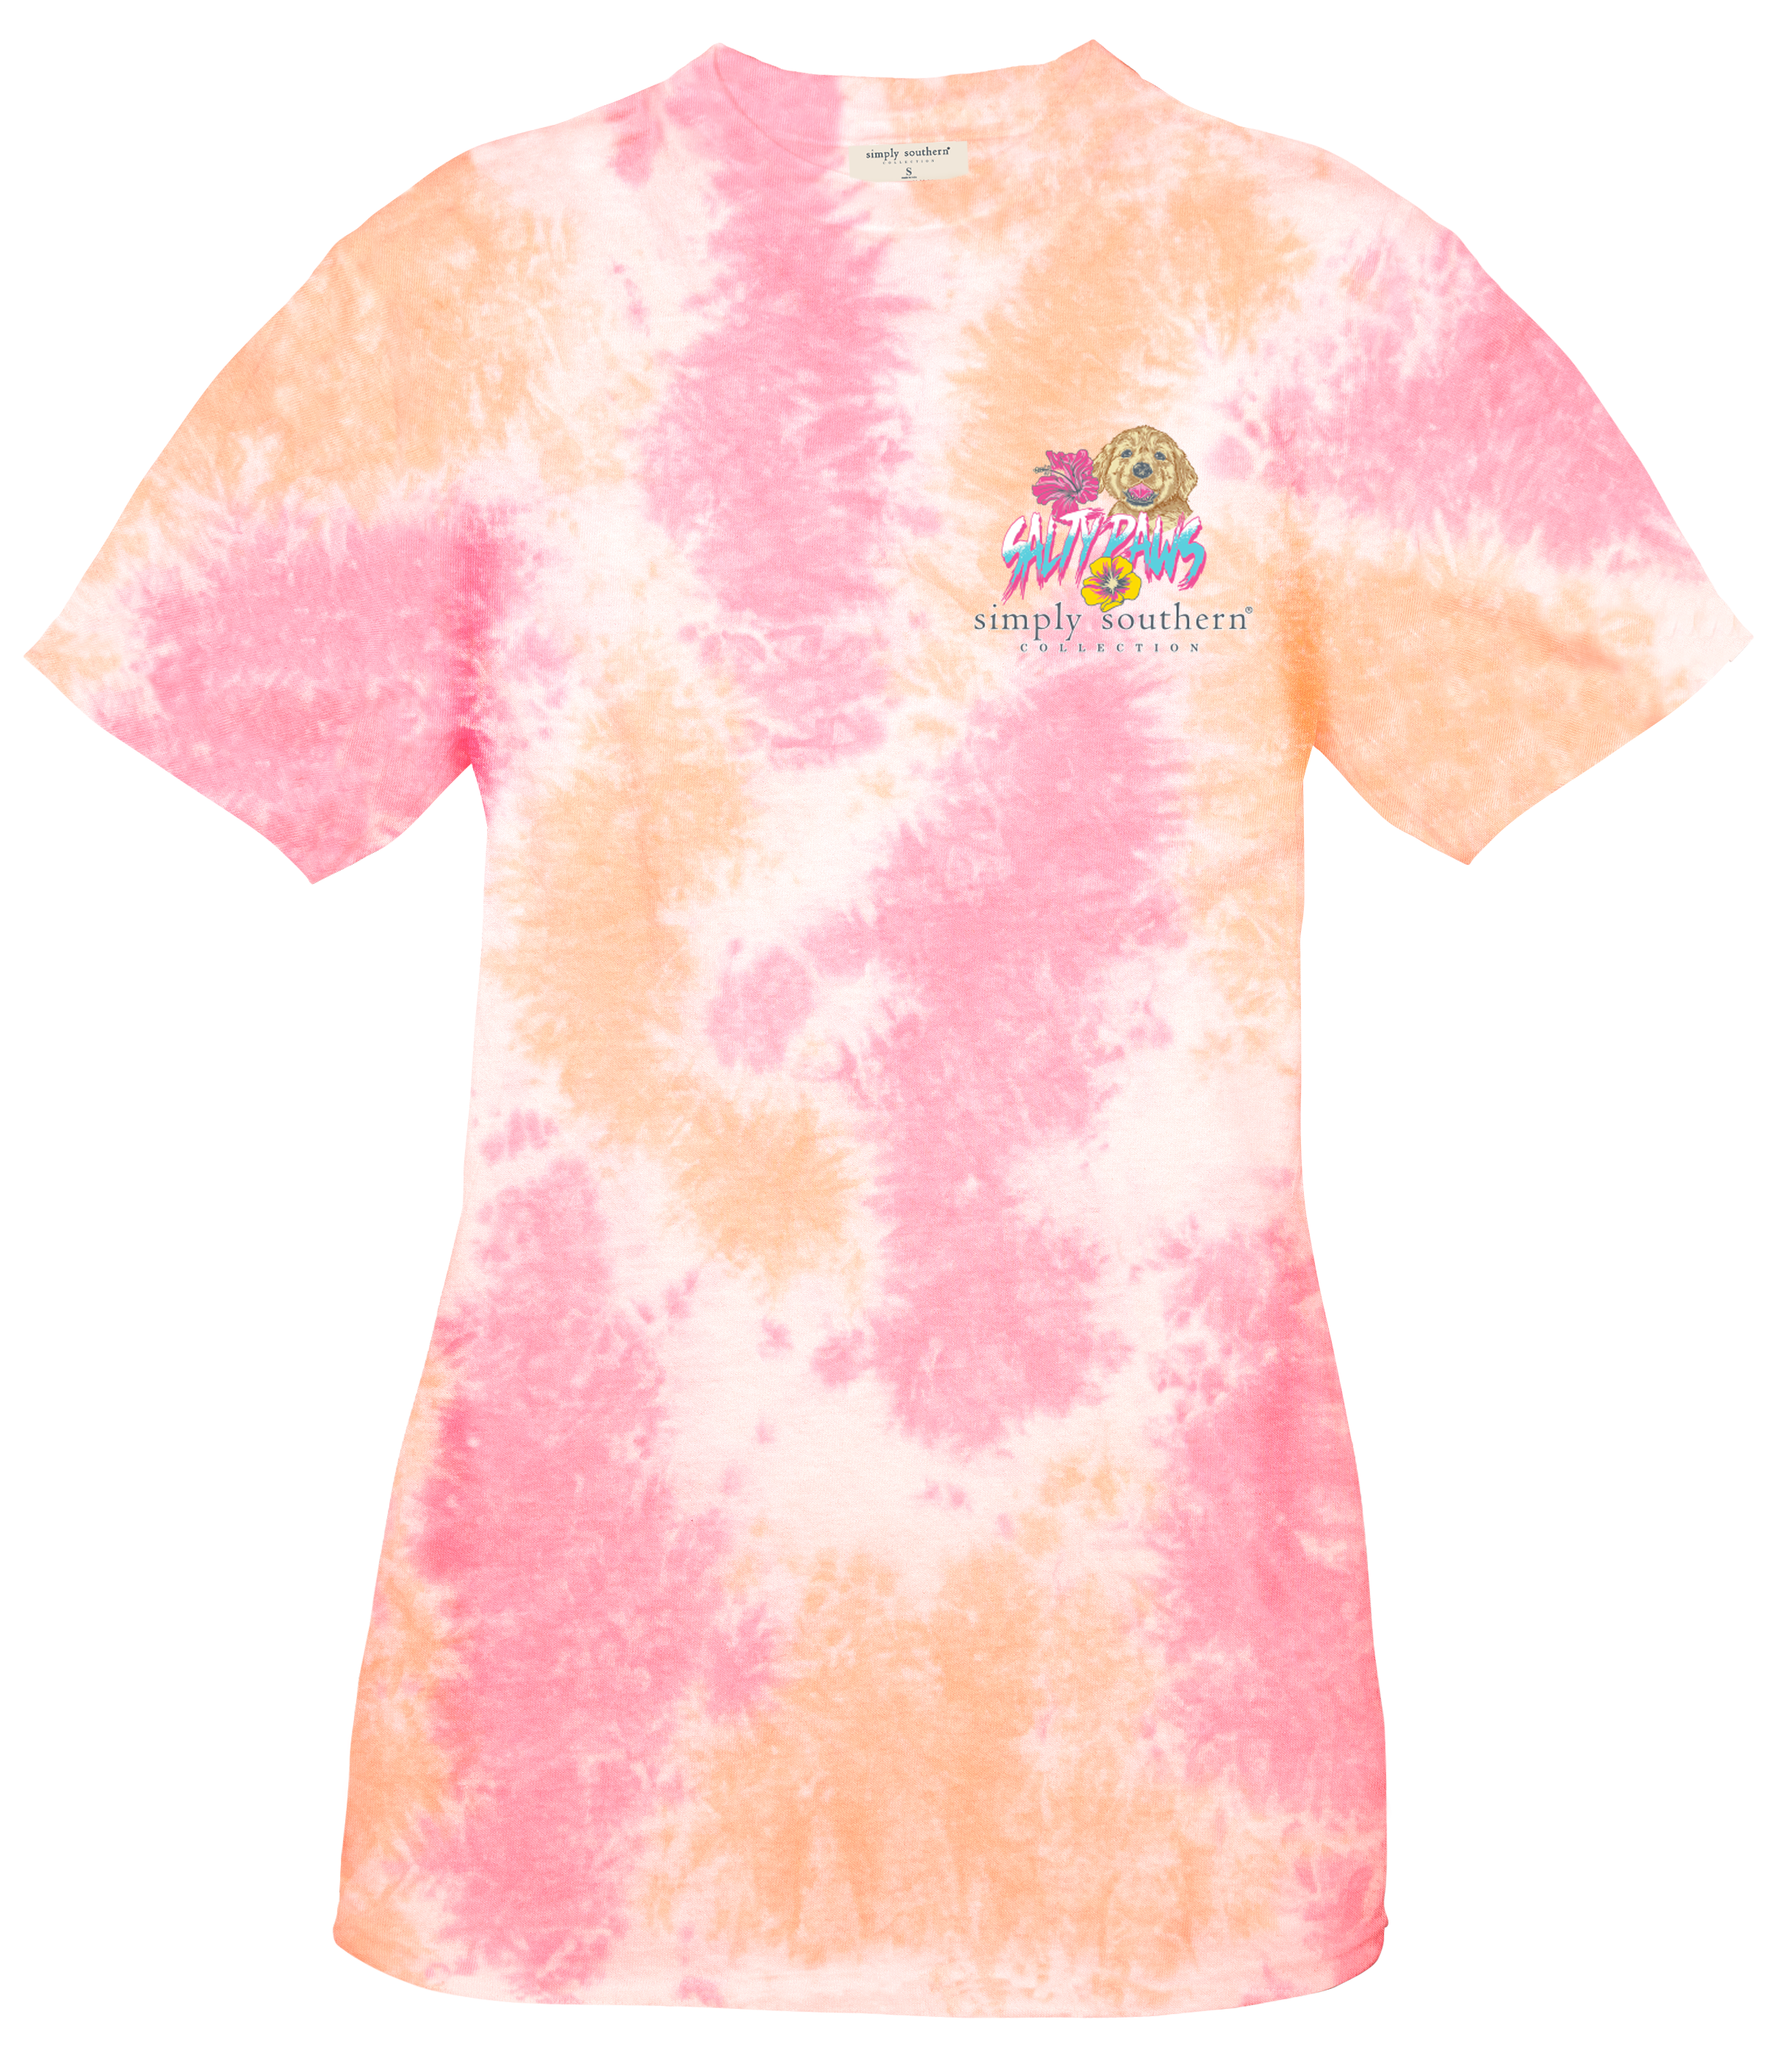 'Salty Paws, Sweet Kisses' Short Sleeve Tie Dye Tee by Simply Southern